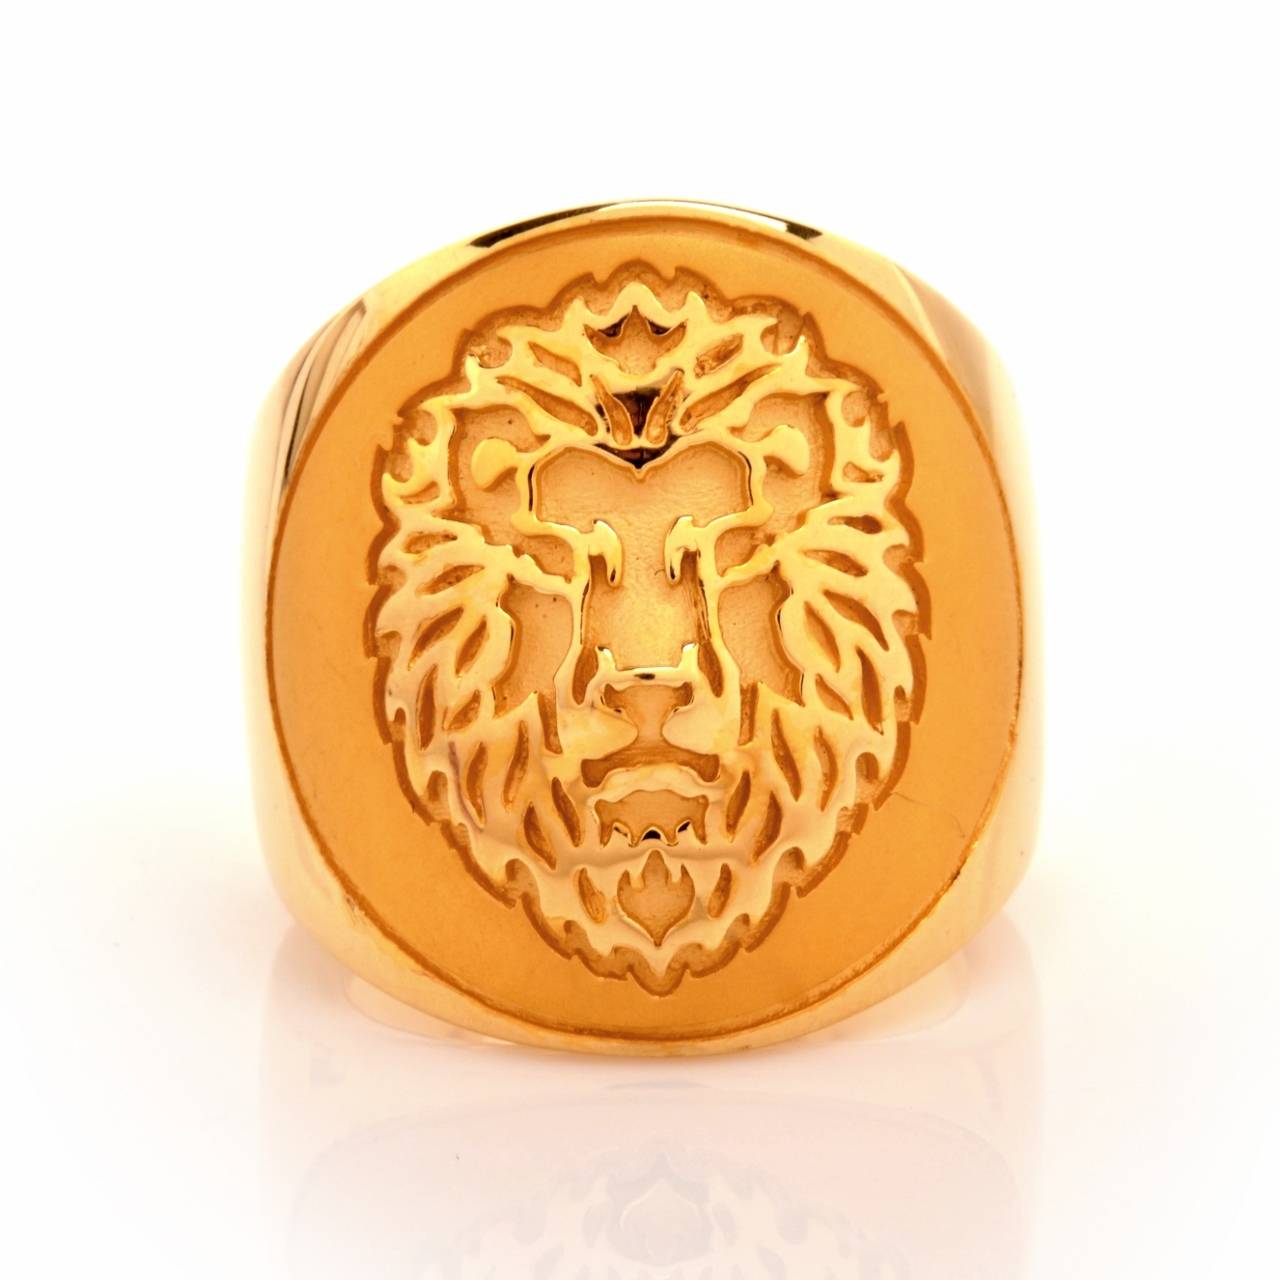 This stunning, 100% Original Carrera Carrera signet ring is crafted beautifully in solid 18K yellow gold. This ring exposes a lion head in a polished and matte gold finish. Signed for authenticity, this lovely ring is in very good